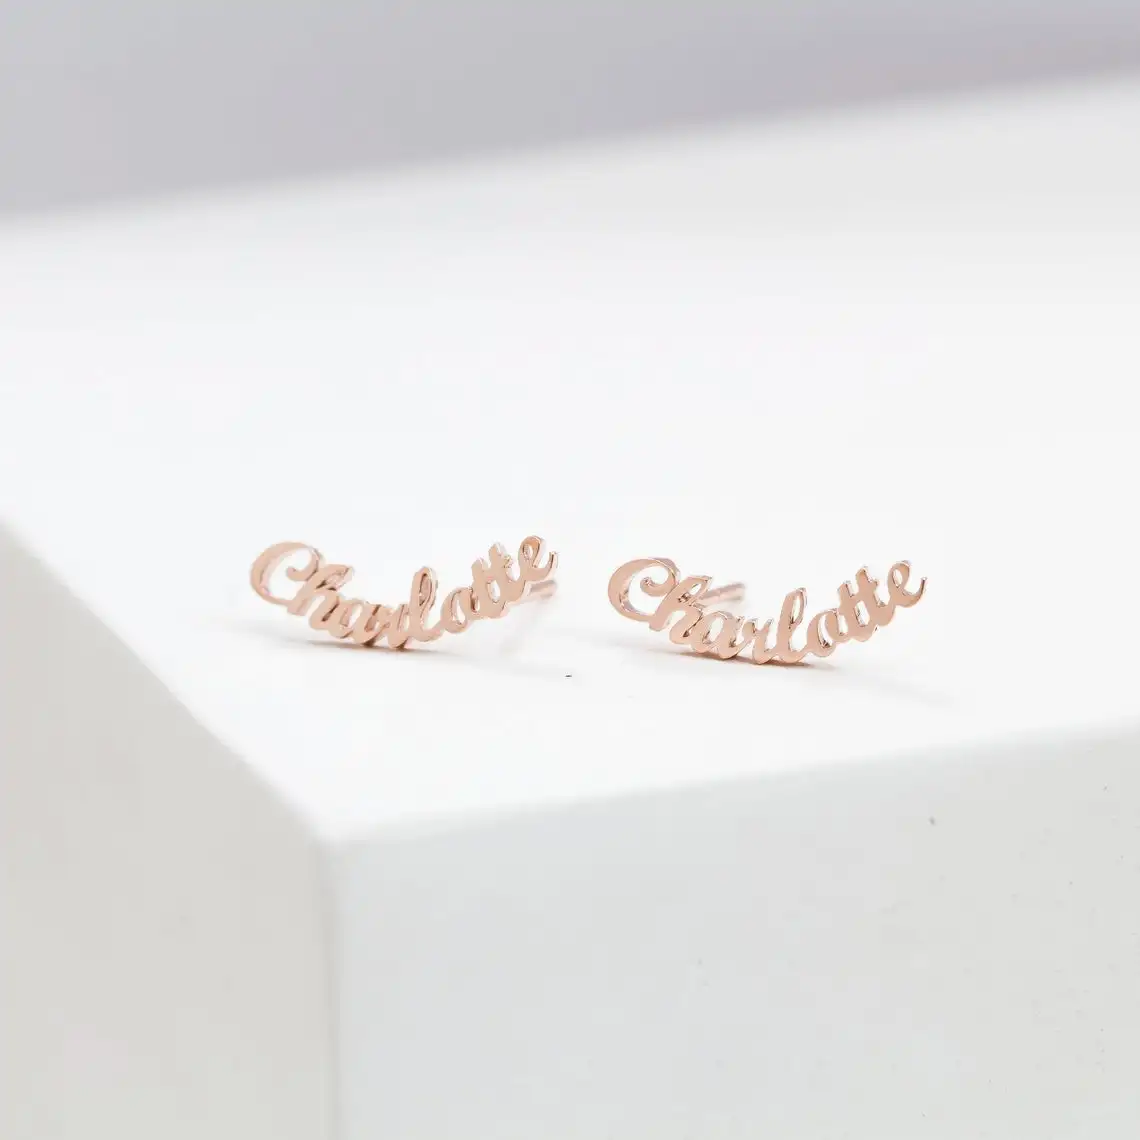 High Quality 18K Gold Jewelry Stainless Steel Custom Font Name Letter Earrings Personalizad Charms Earring for Women Friends